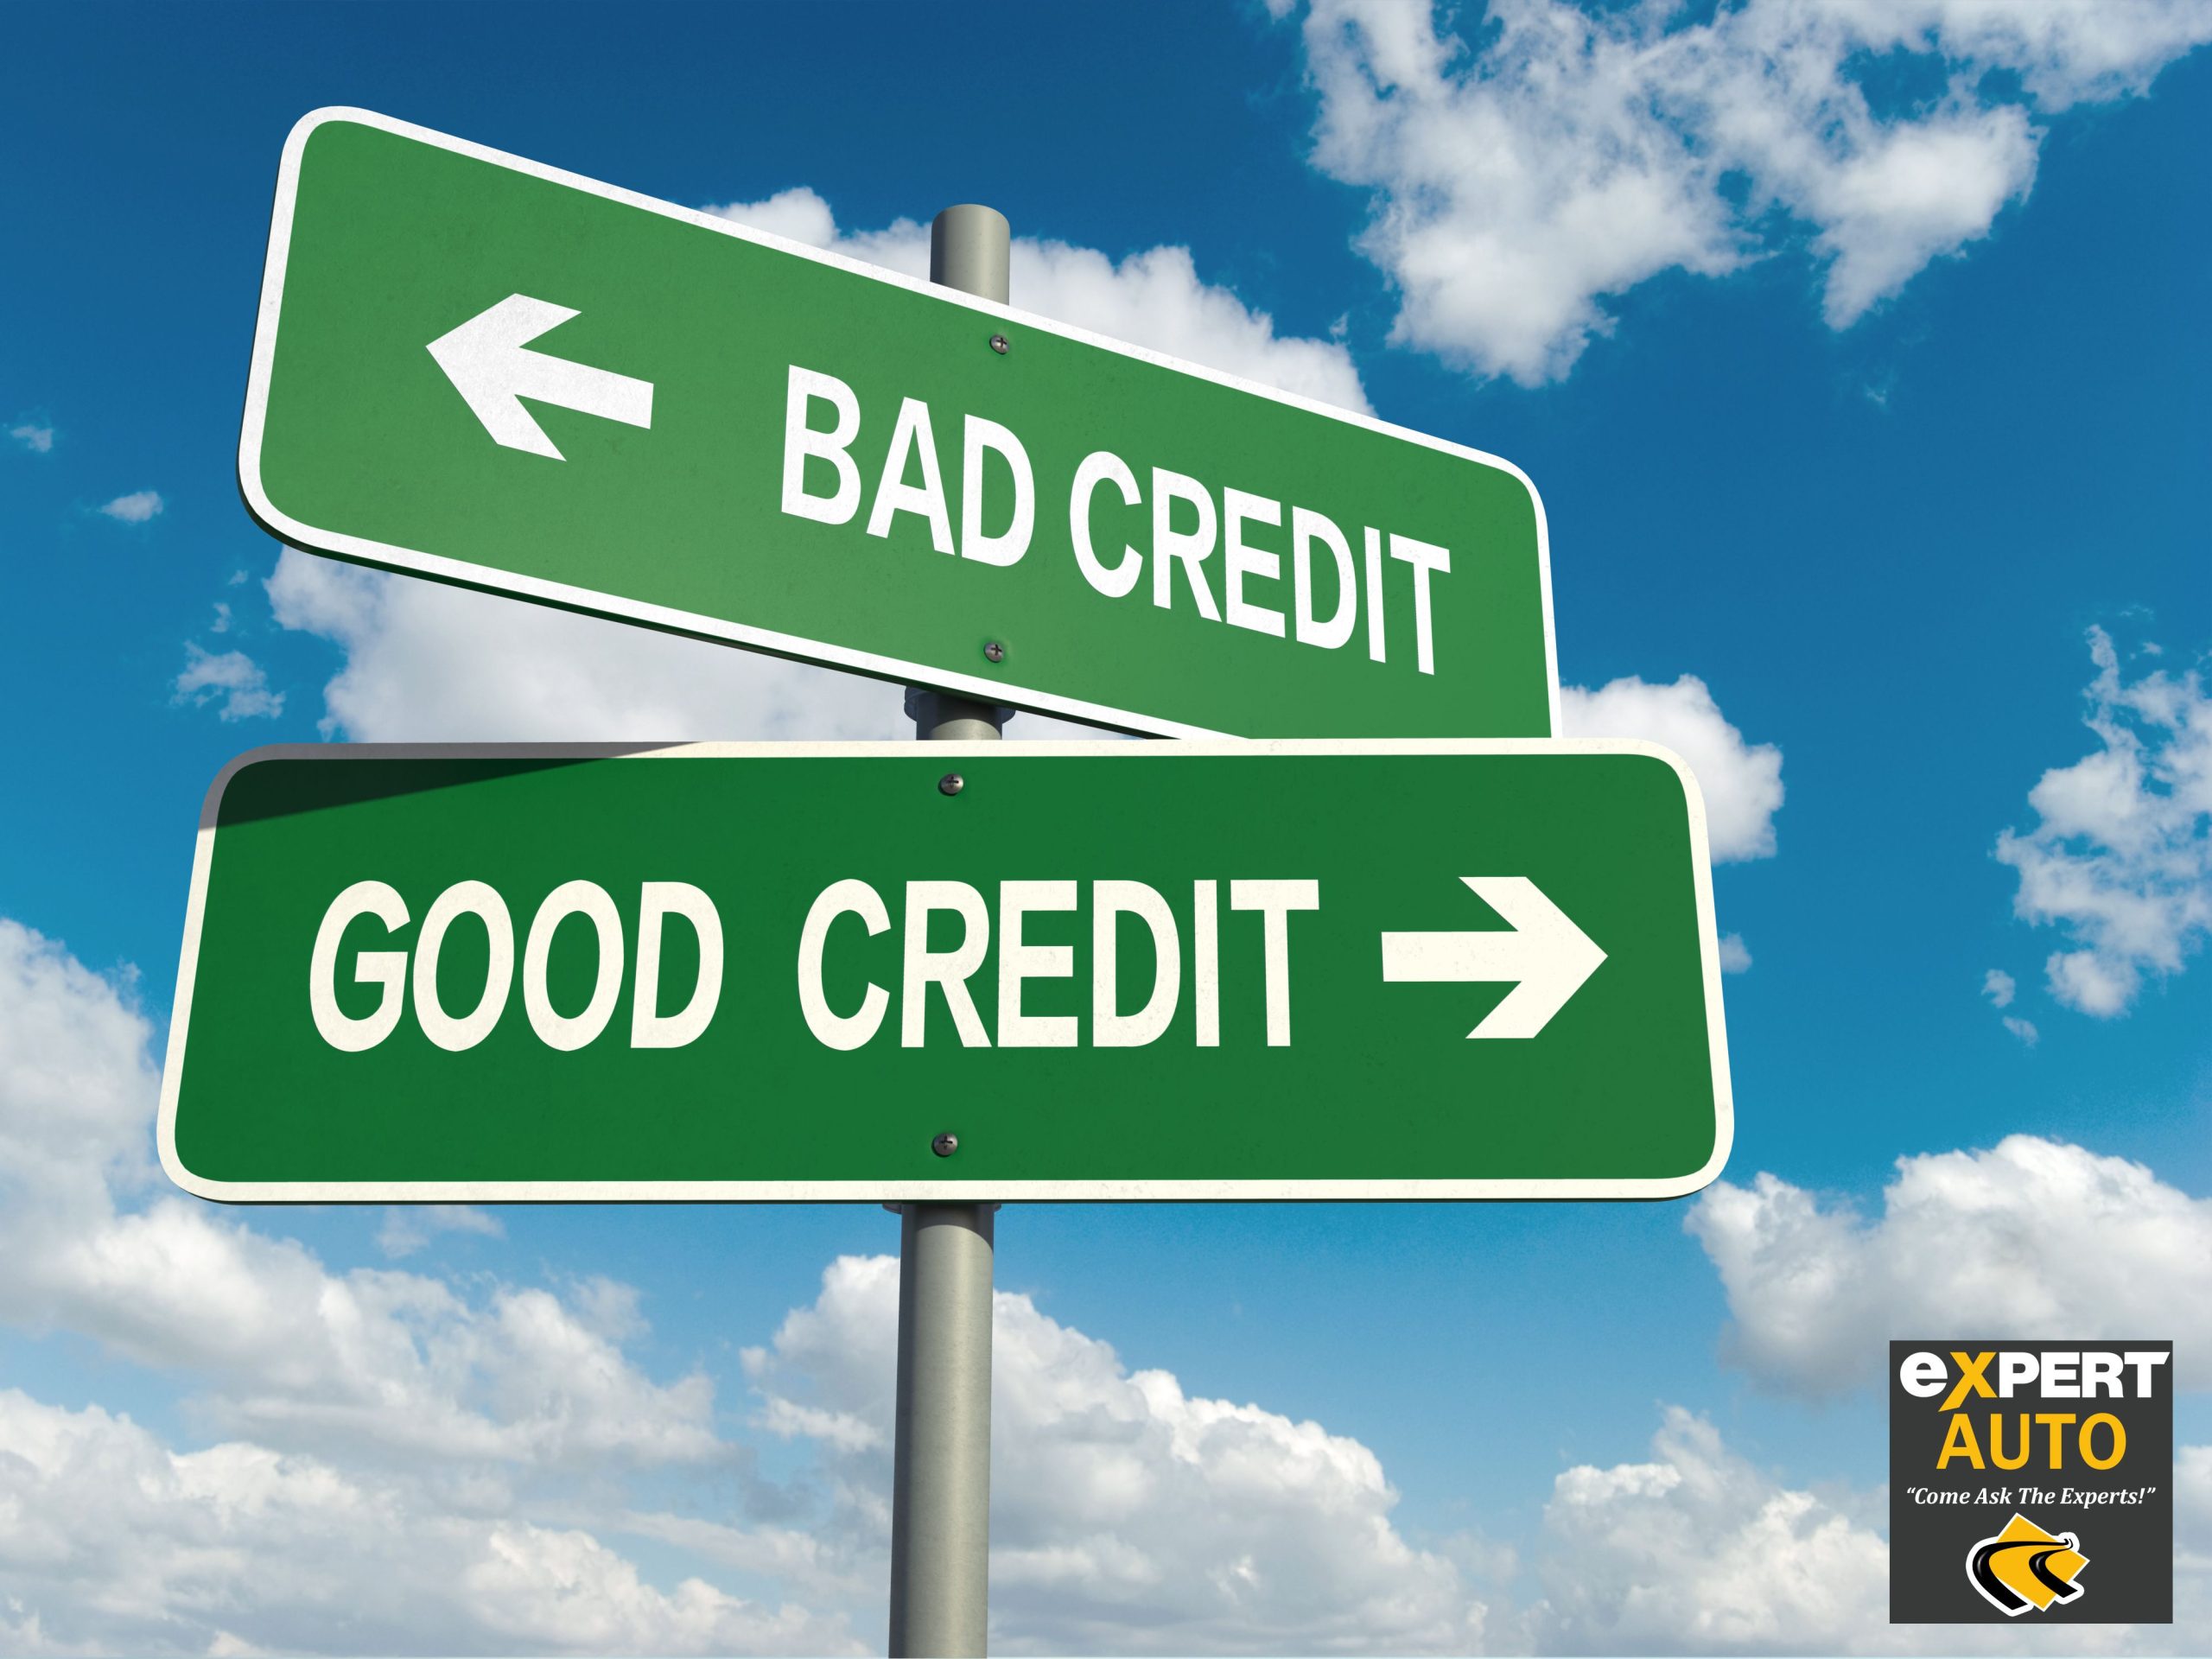 Your Good Credit Could Get You Excellent Used Car Loans